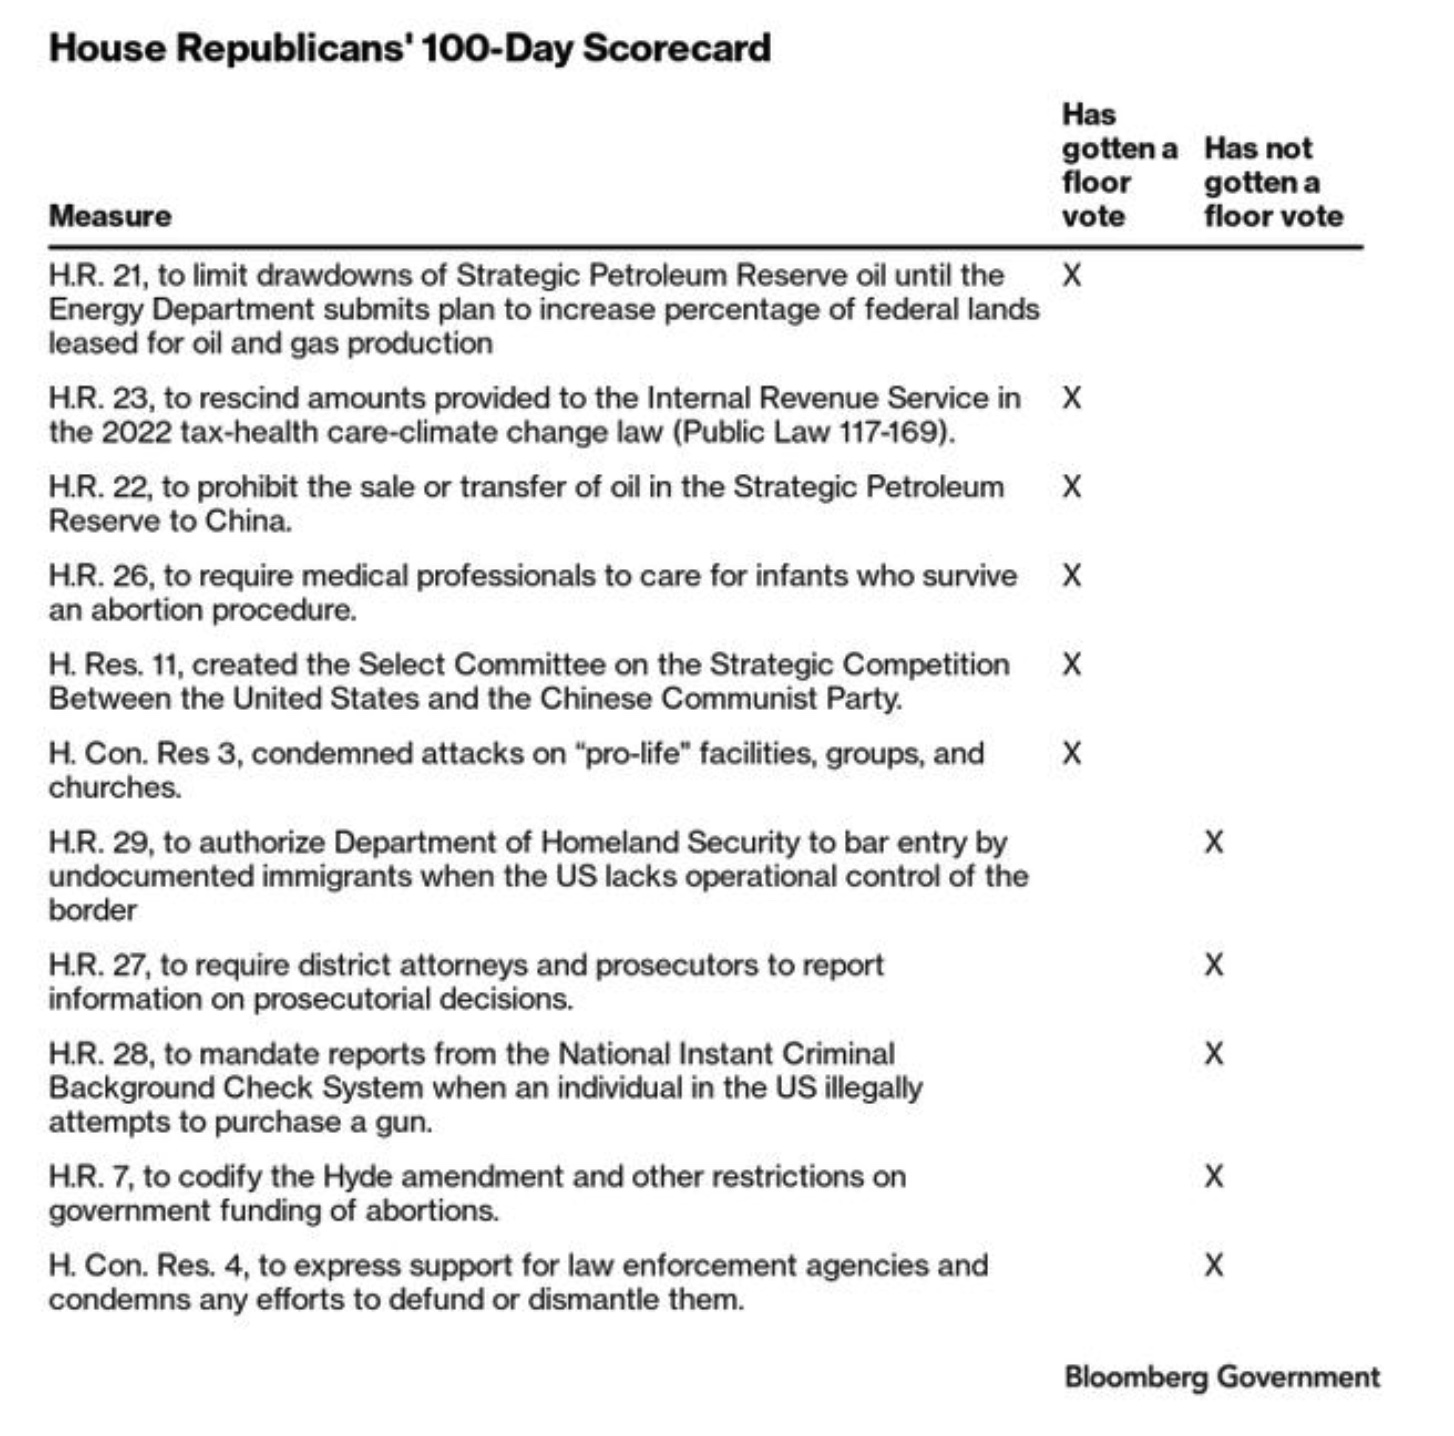 House report card